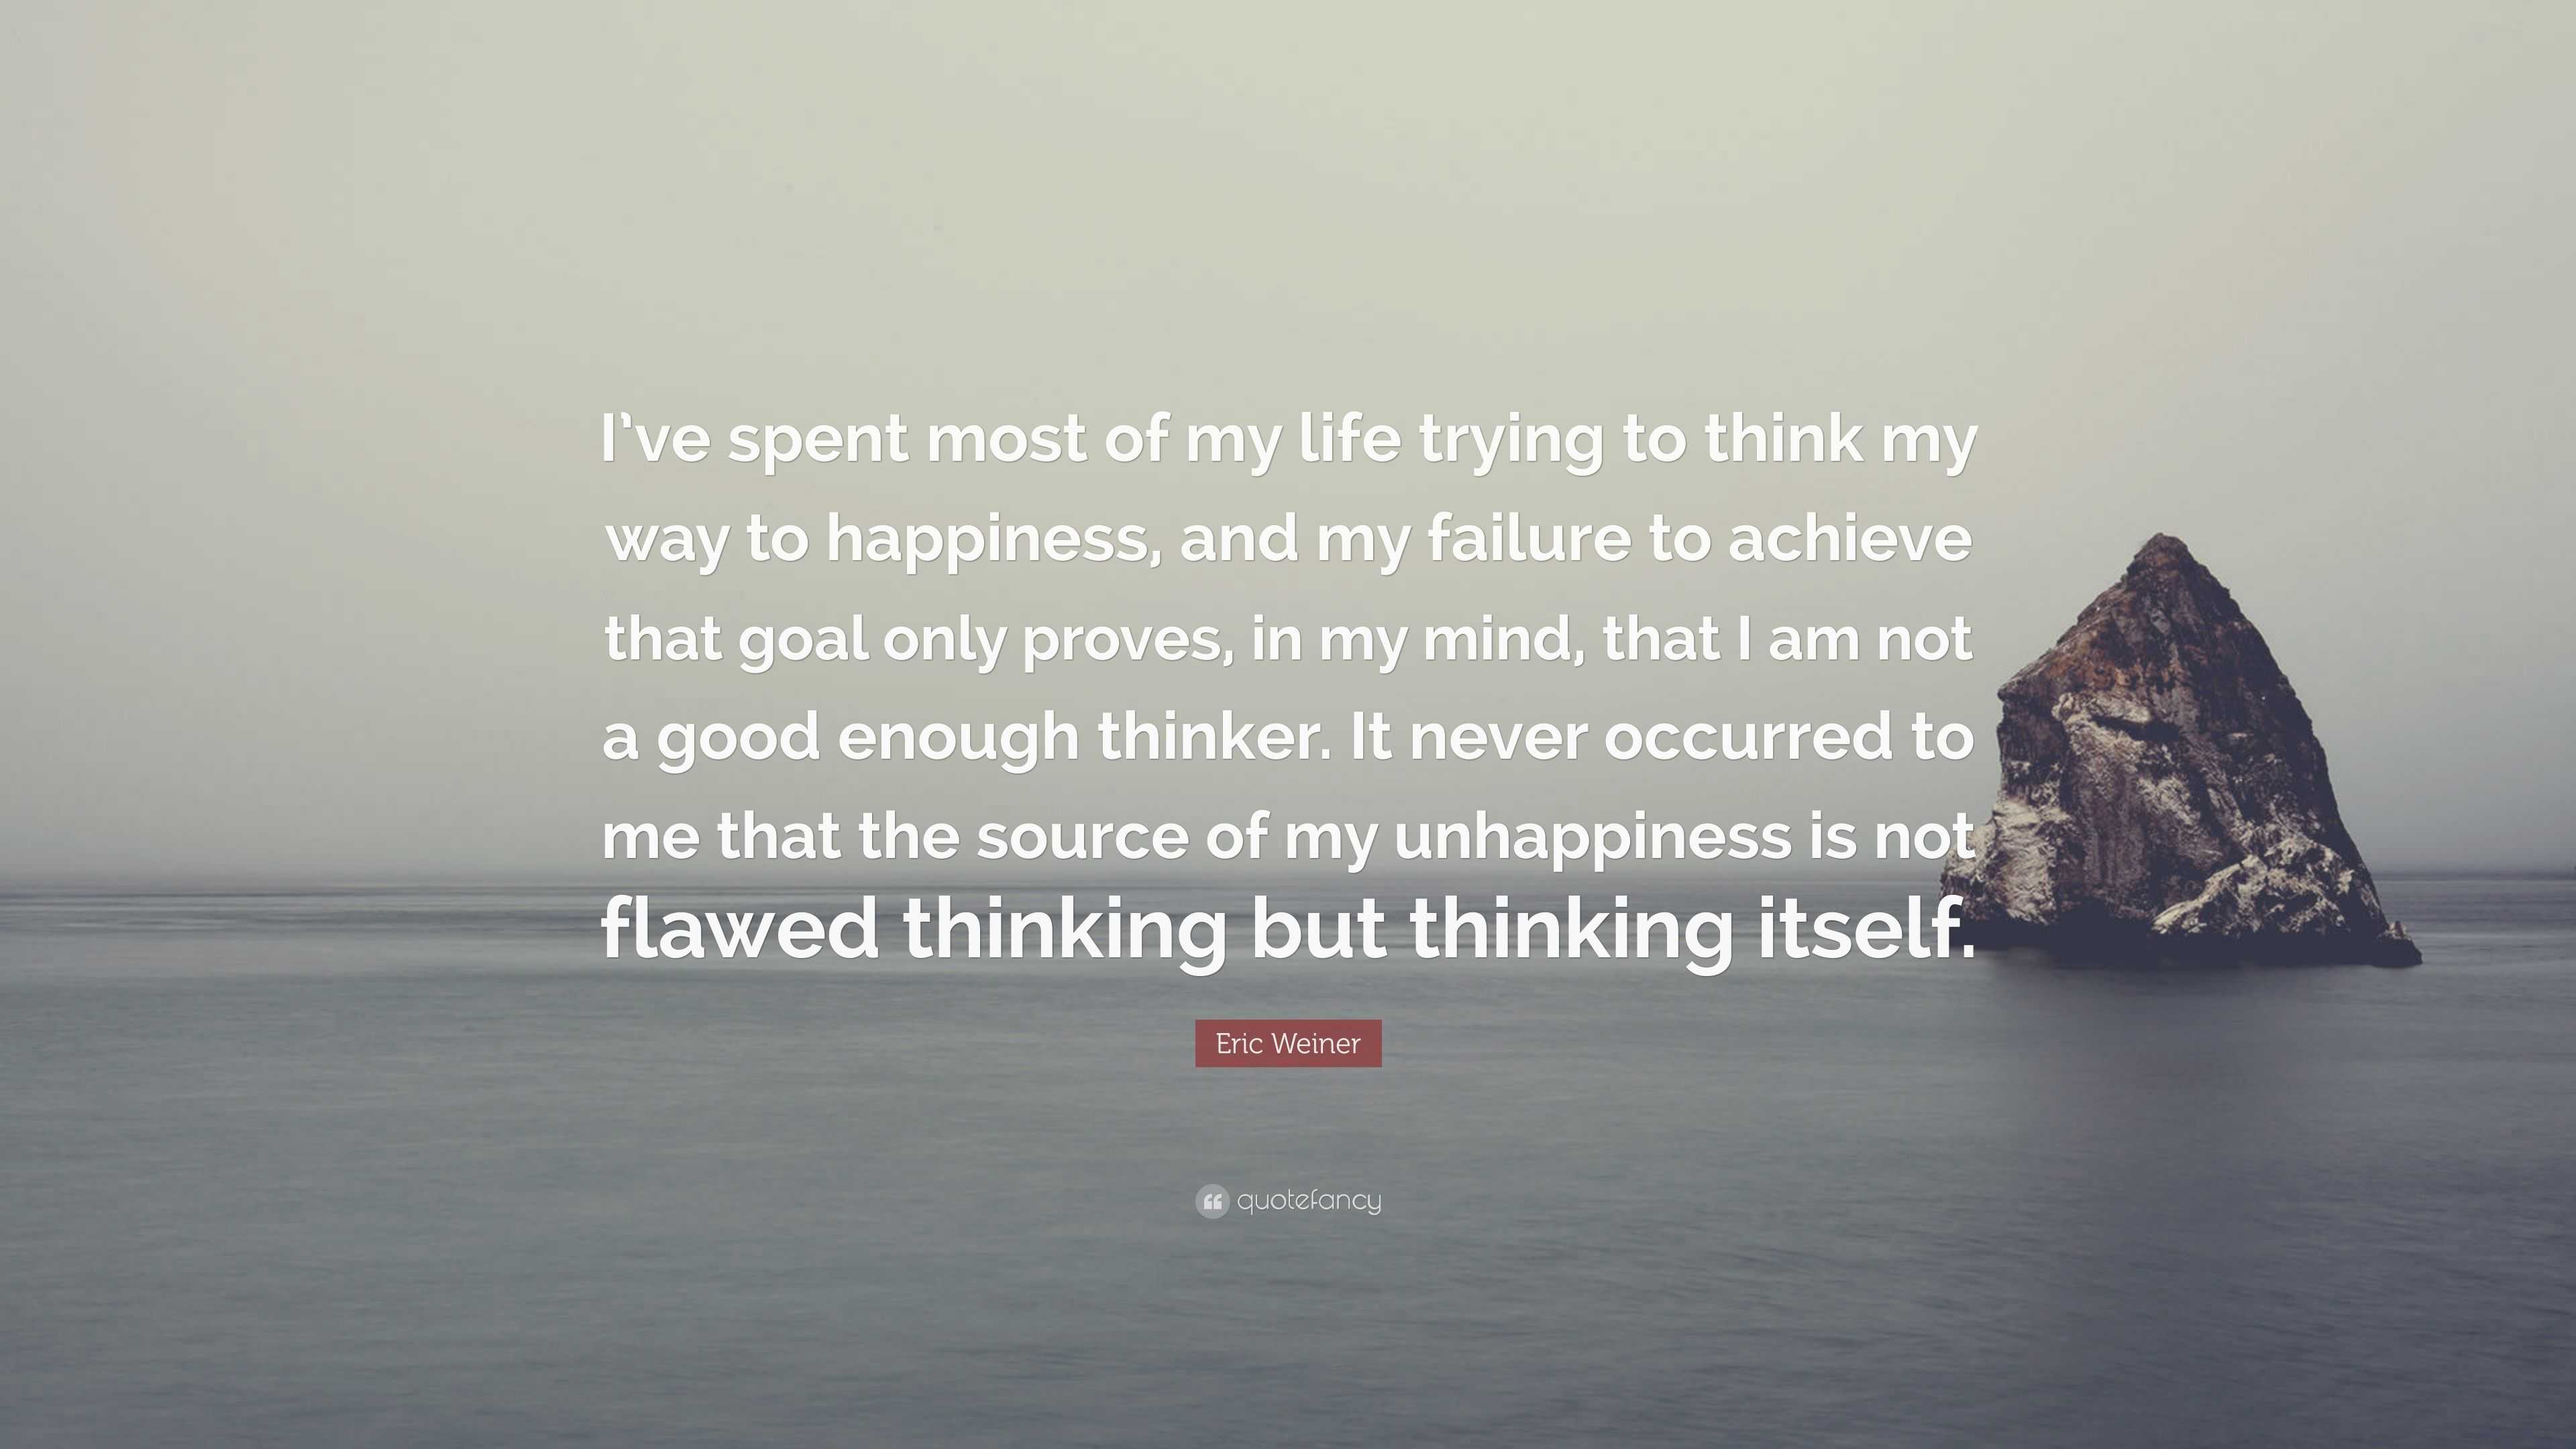 Eric Weiner Quote: “I’ve spent most of my life trying to think my way